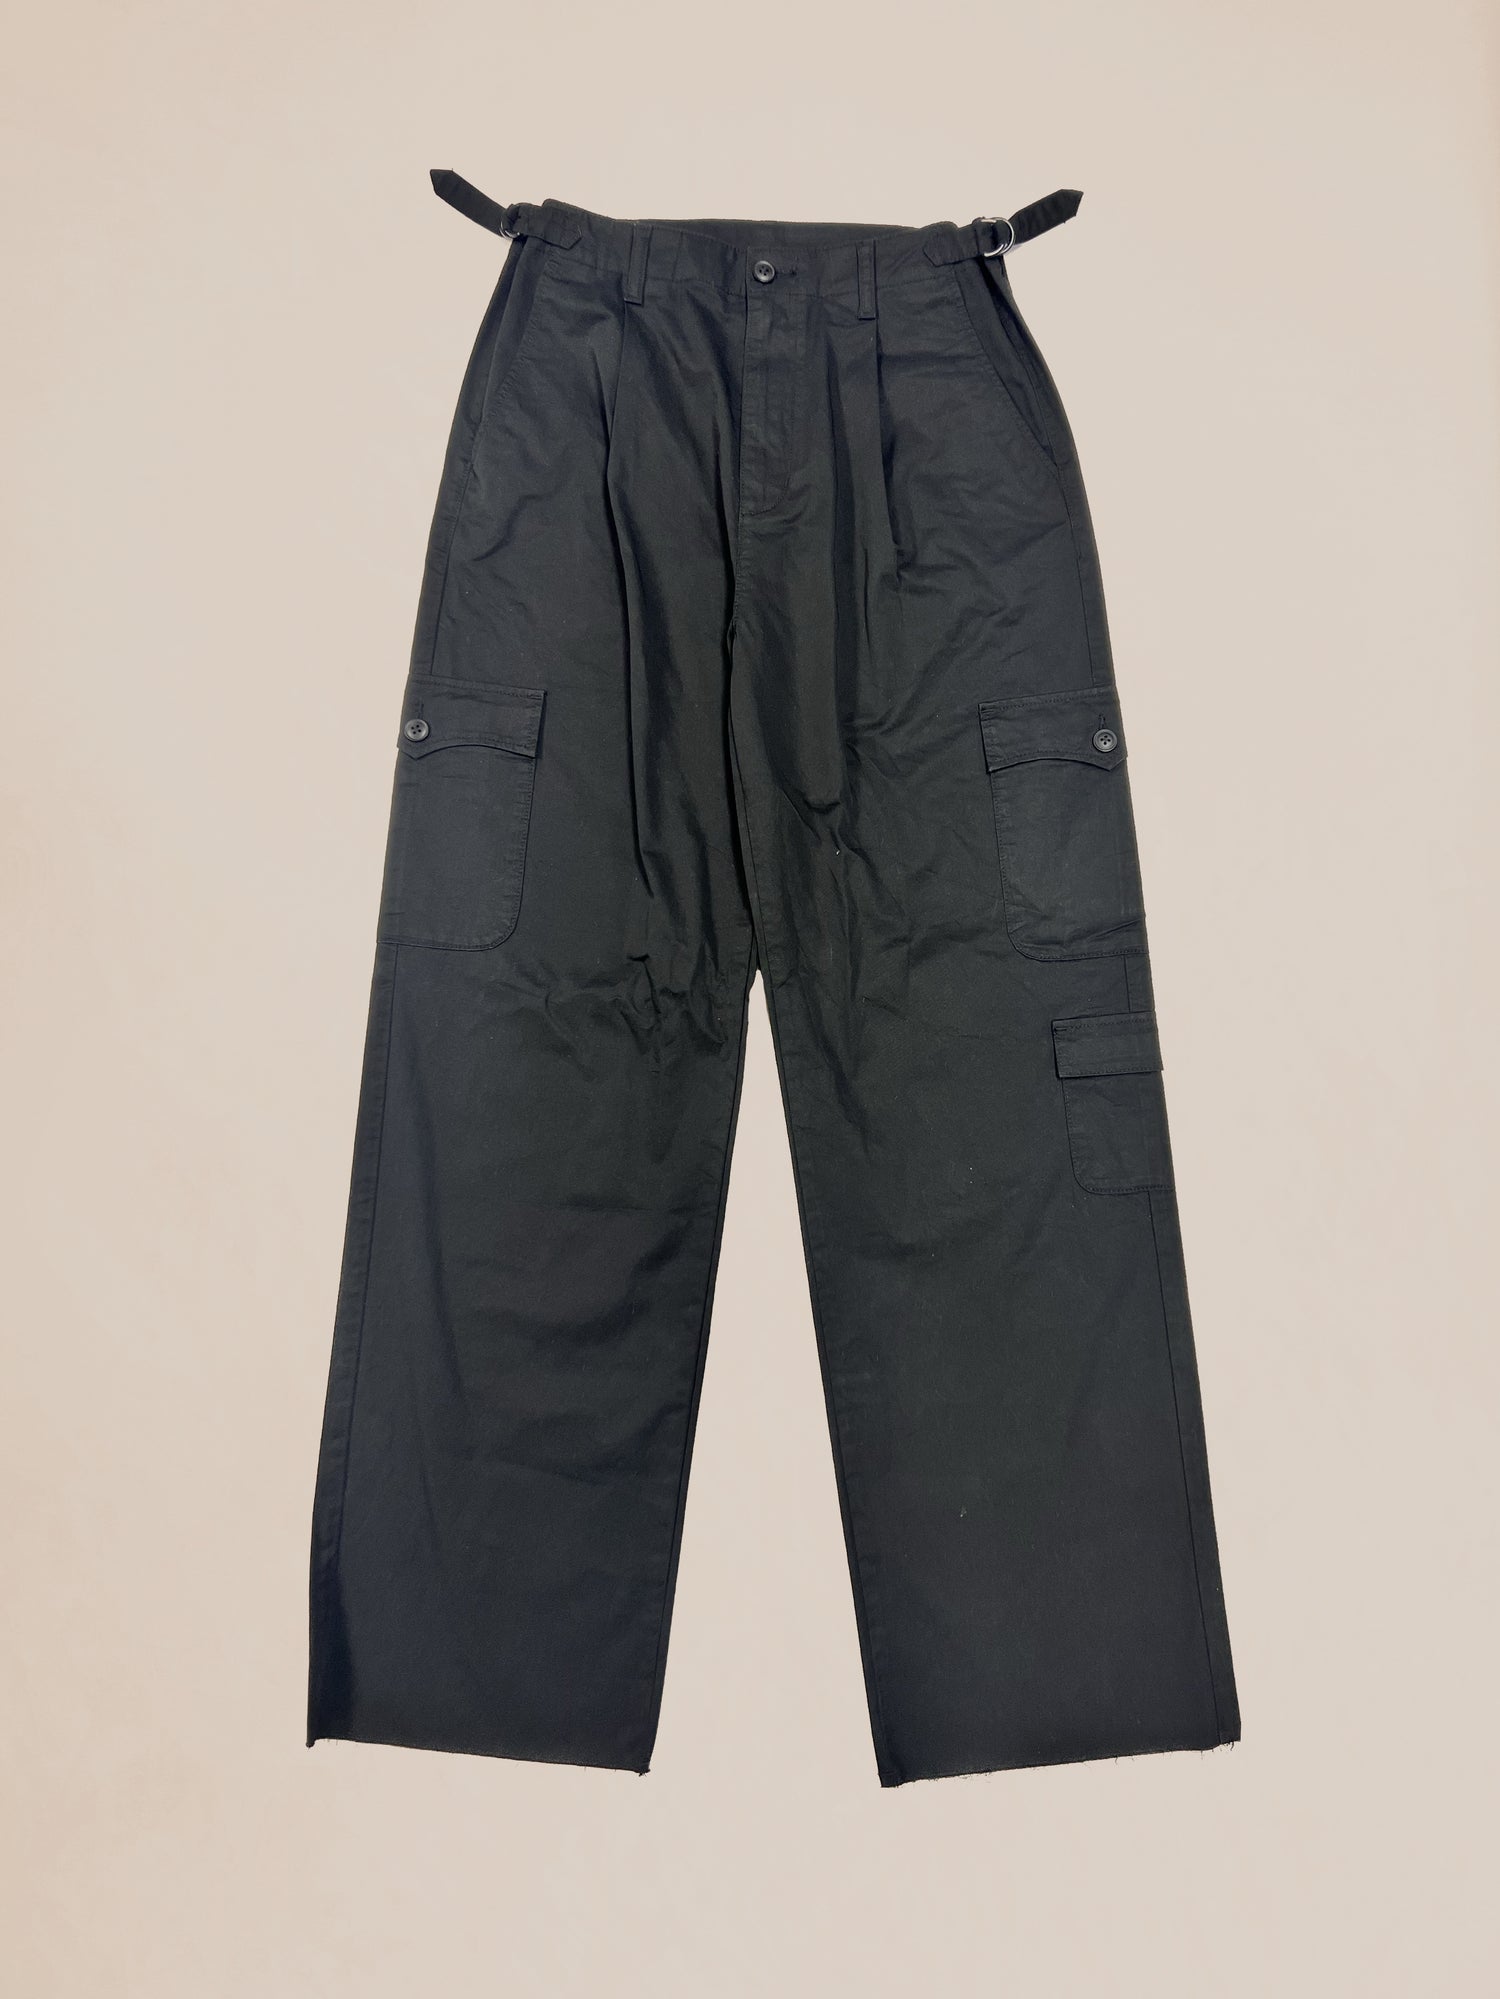 Black nylon cargo pants with side pockets displayed on a neutral background, waist 32.